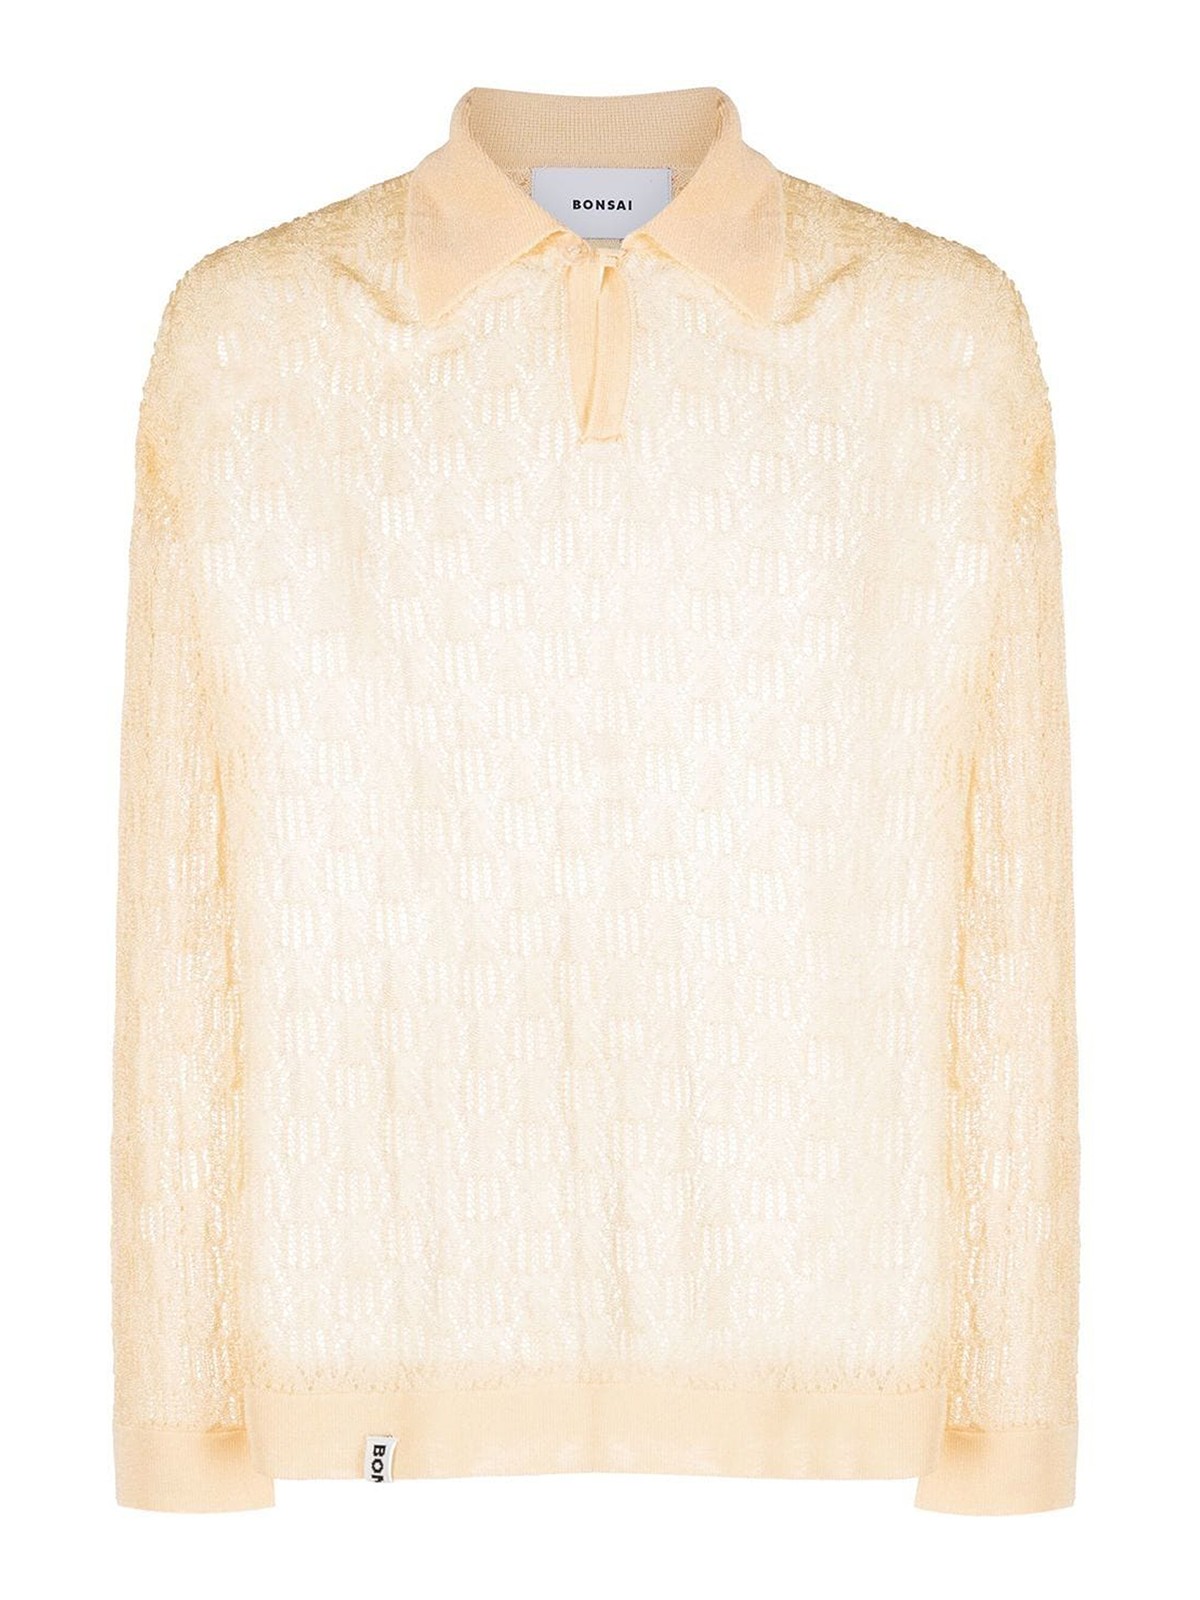 Charles Jeffrey Loverboy Knitted Sheer Polo In White